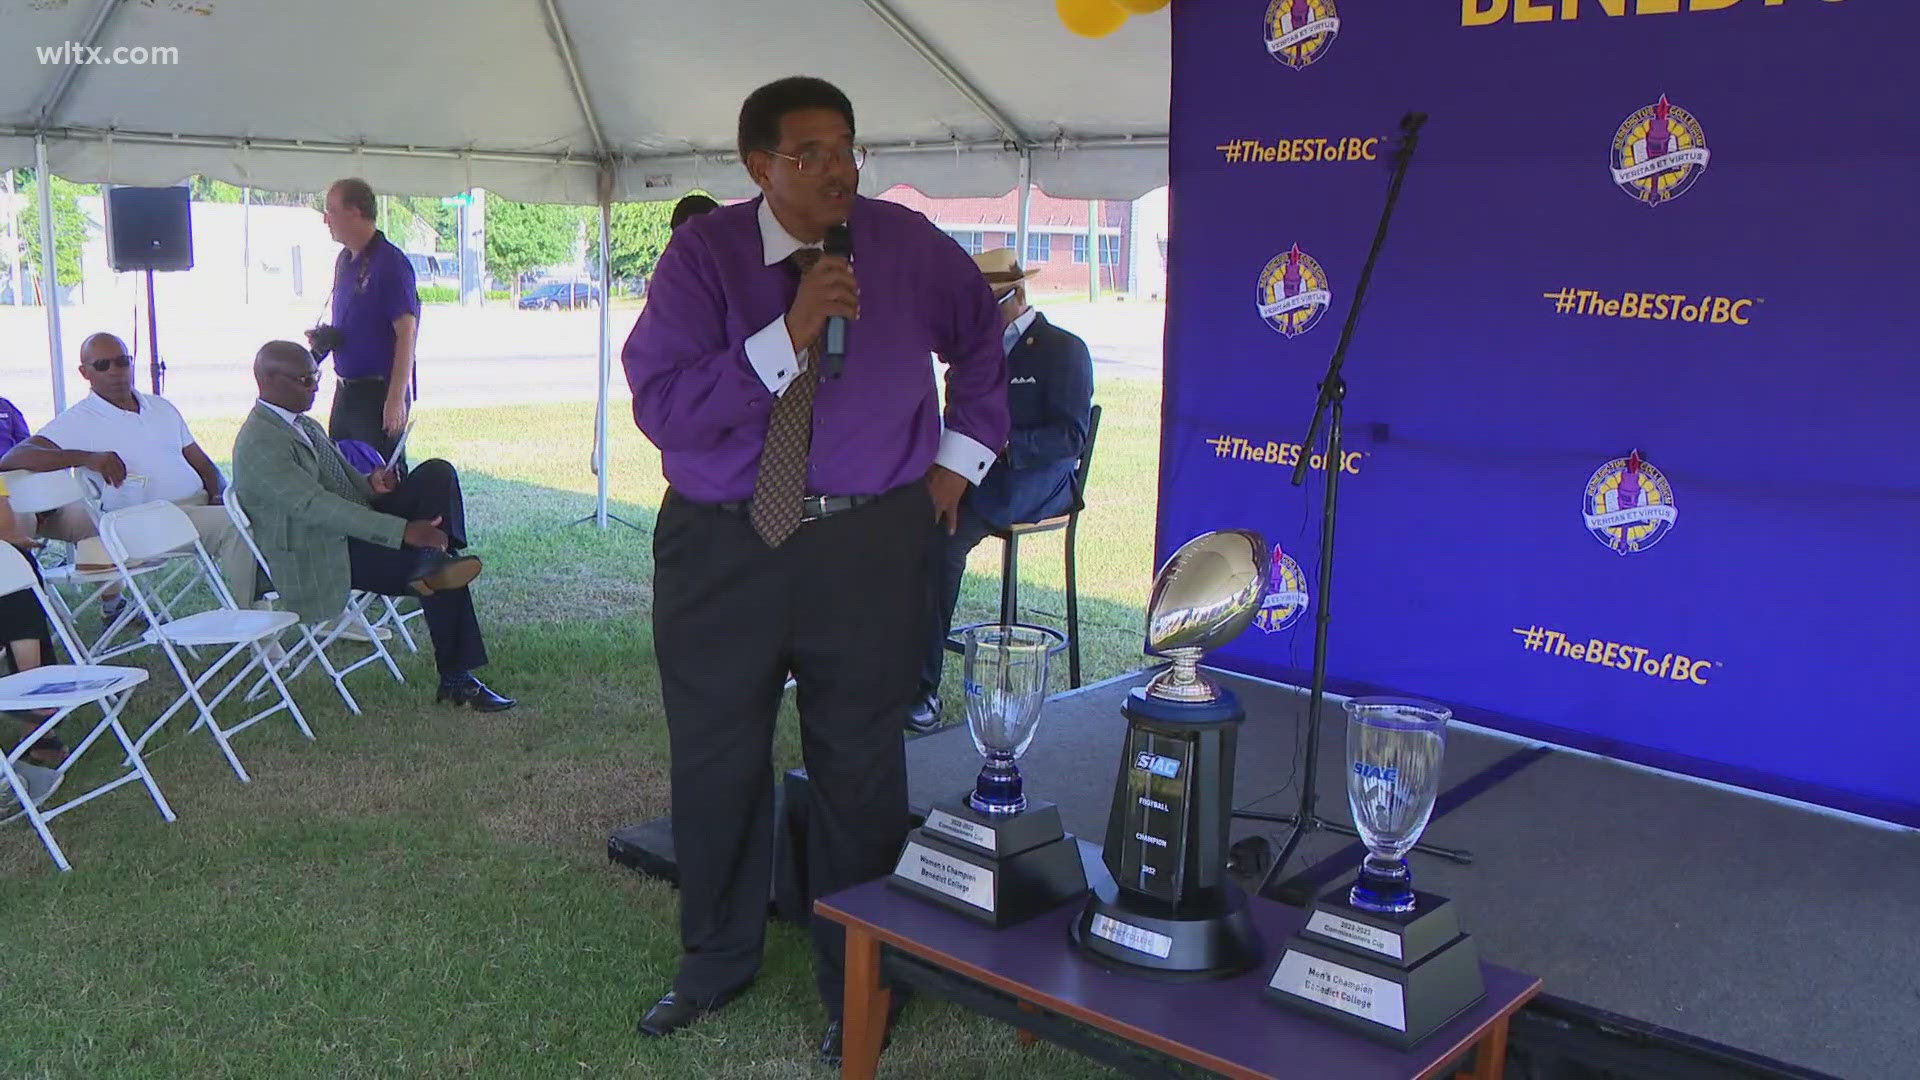 Benedict College athletics director Willie Washington will be inducted into the Southern Intercollegiate Athletic Conference Hall of Fame this summer in Atlanta